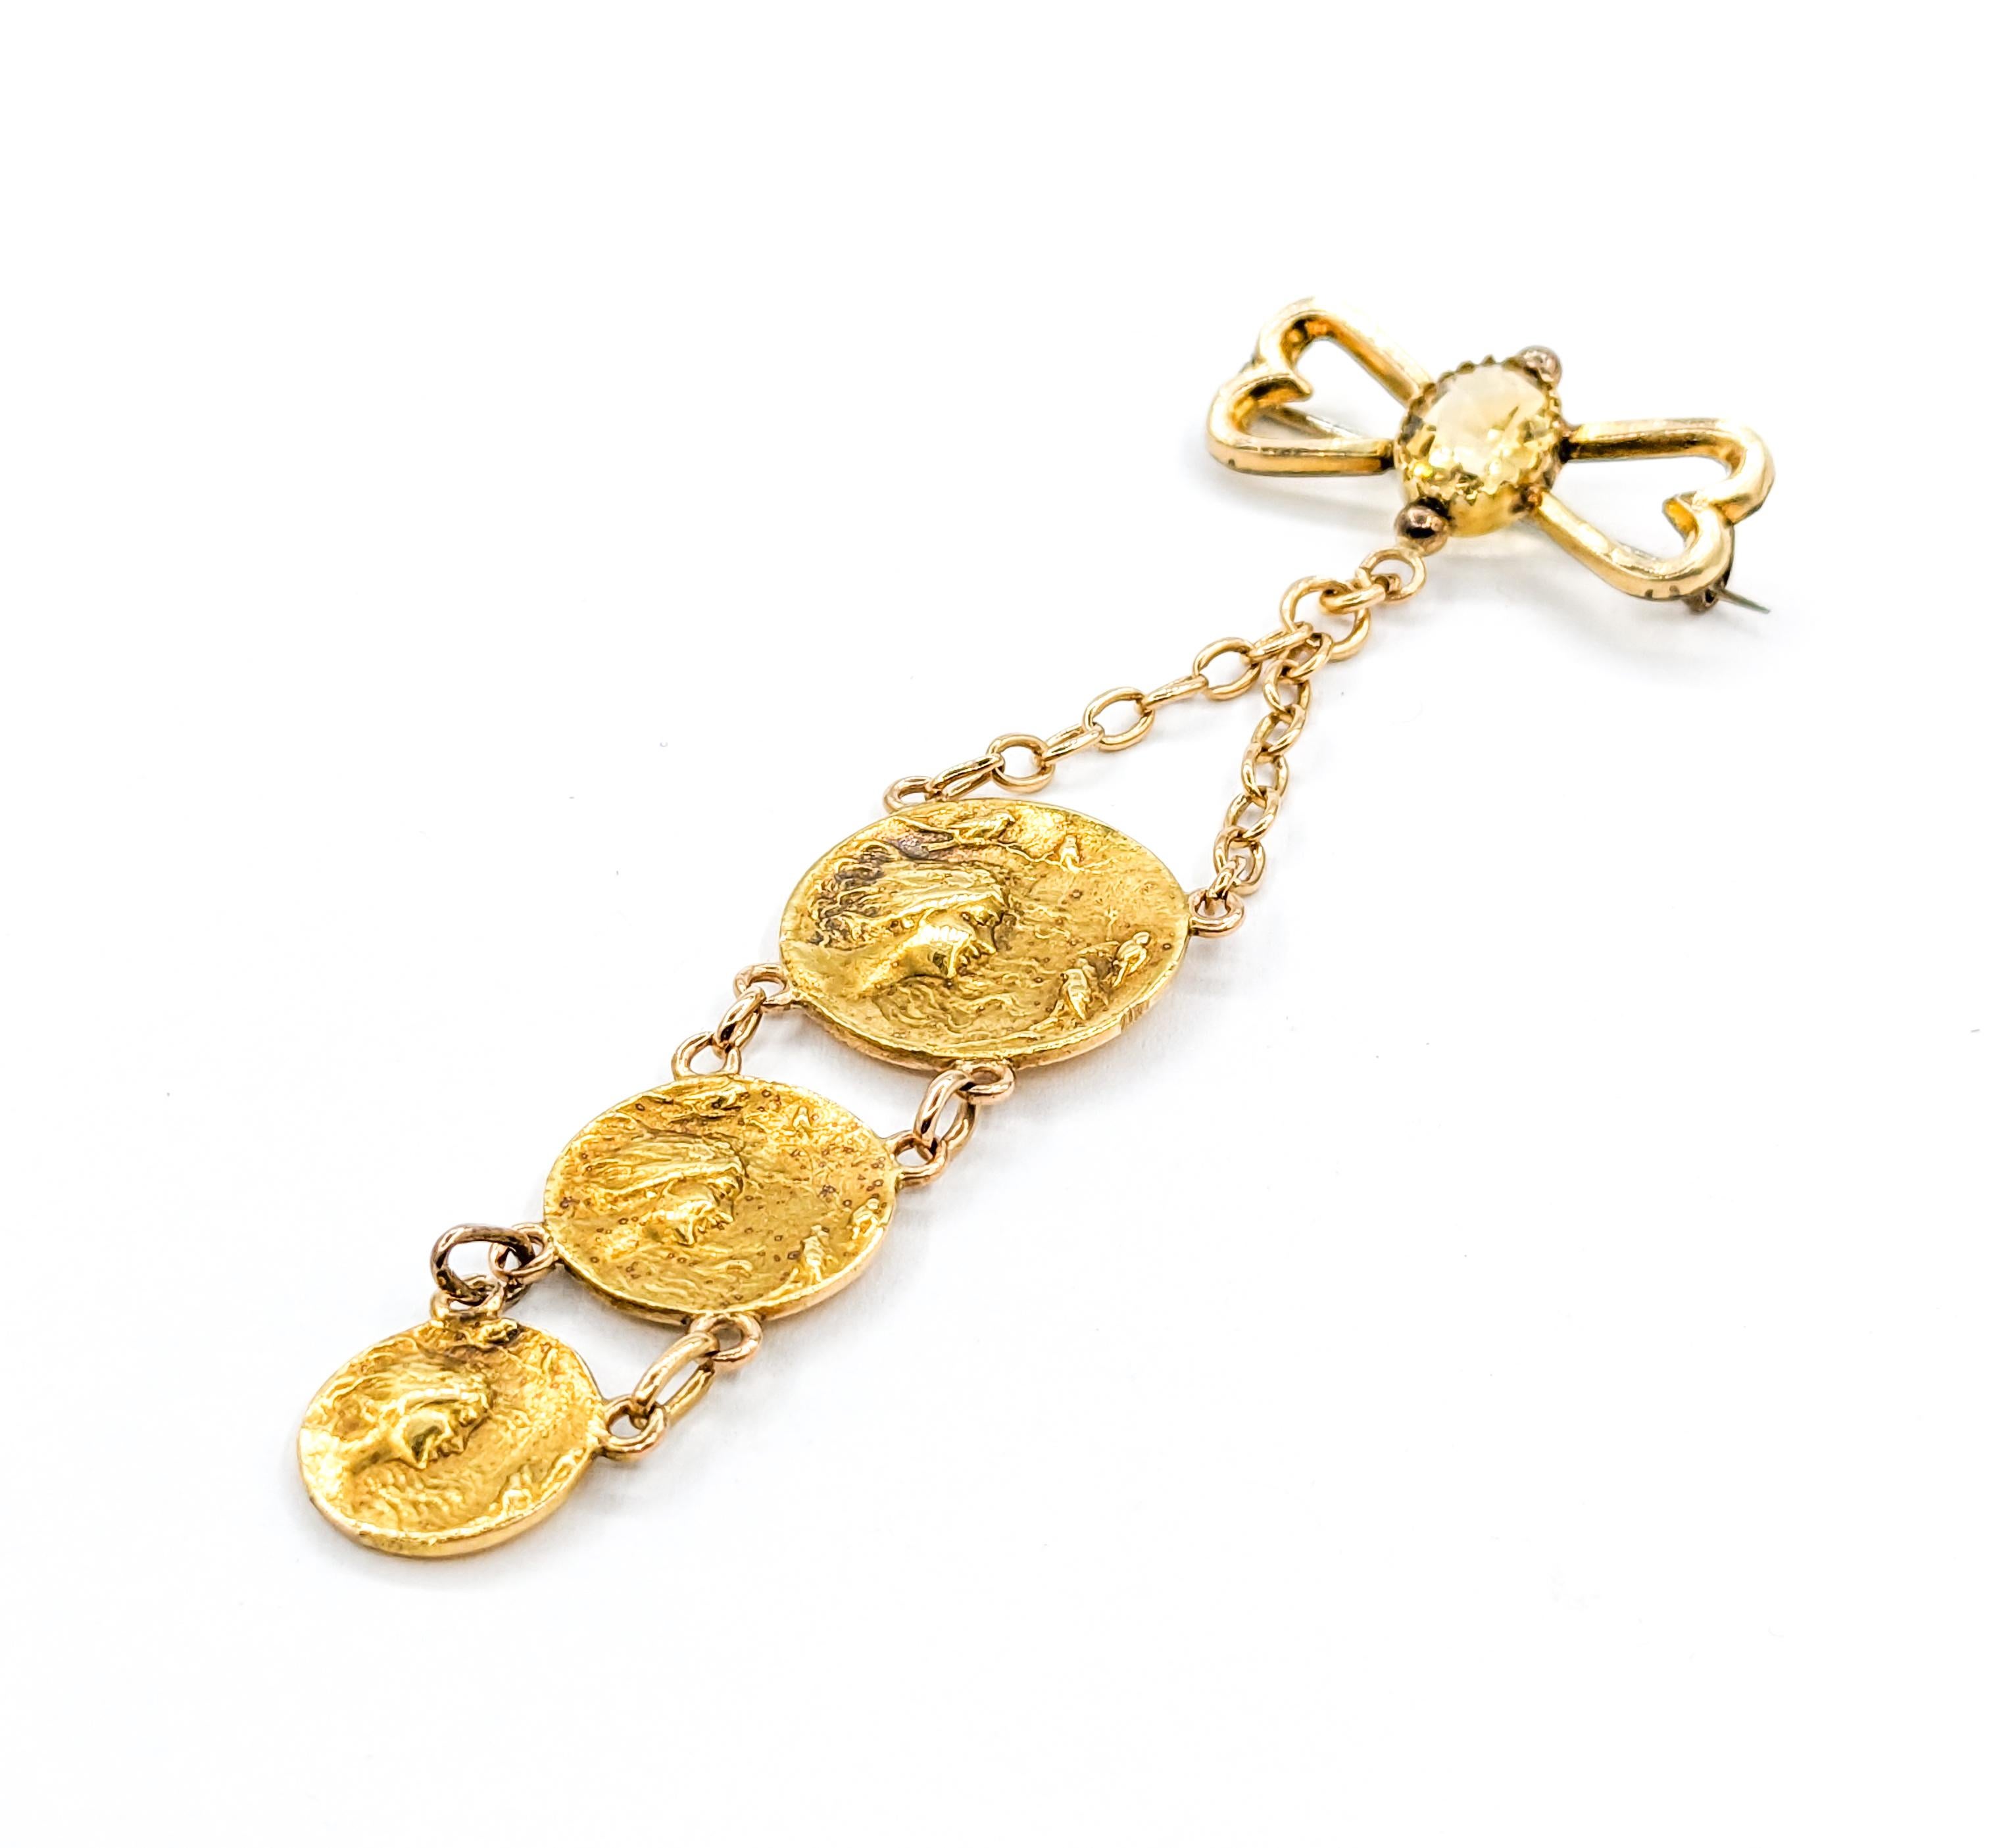 Citrine Brooch Art Nouveau Lady and birds In Yellow Gold

Introducing an elegant Art Nouveau Lady and Birds Brooch, meticulously crafted in 18kt & 10kt Yellow Gold. This stunning piece features a yellow Citrine gemstone with a golden hue. The Brooch